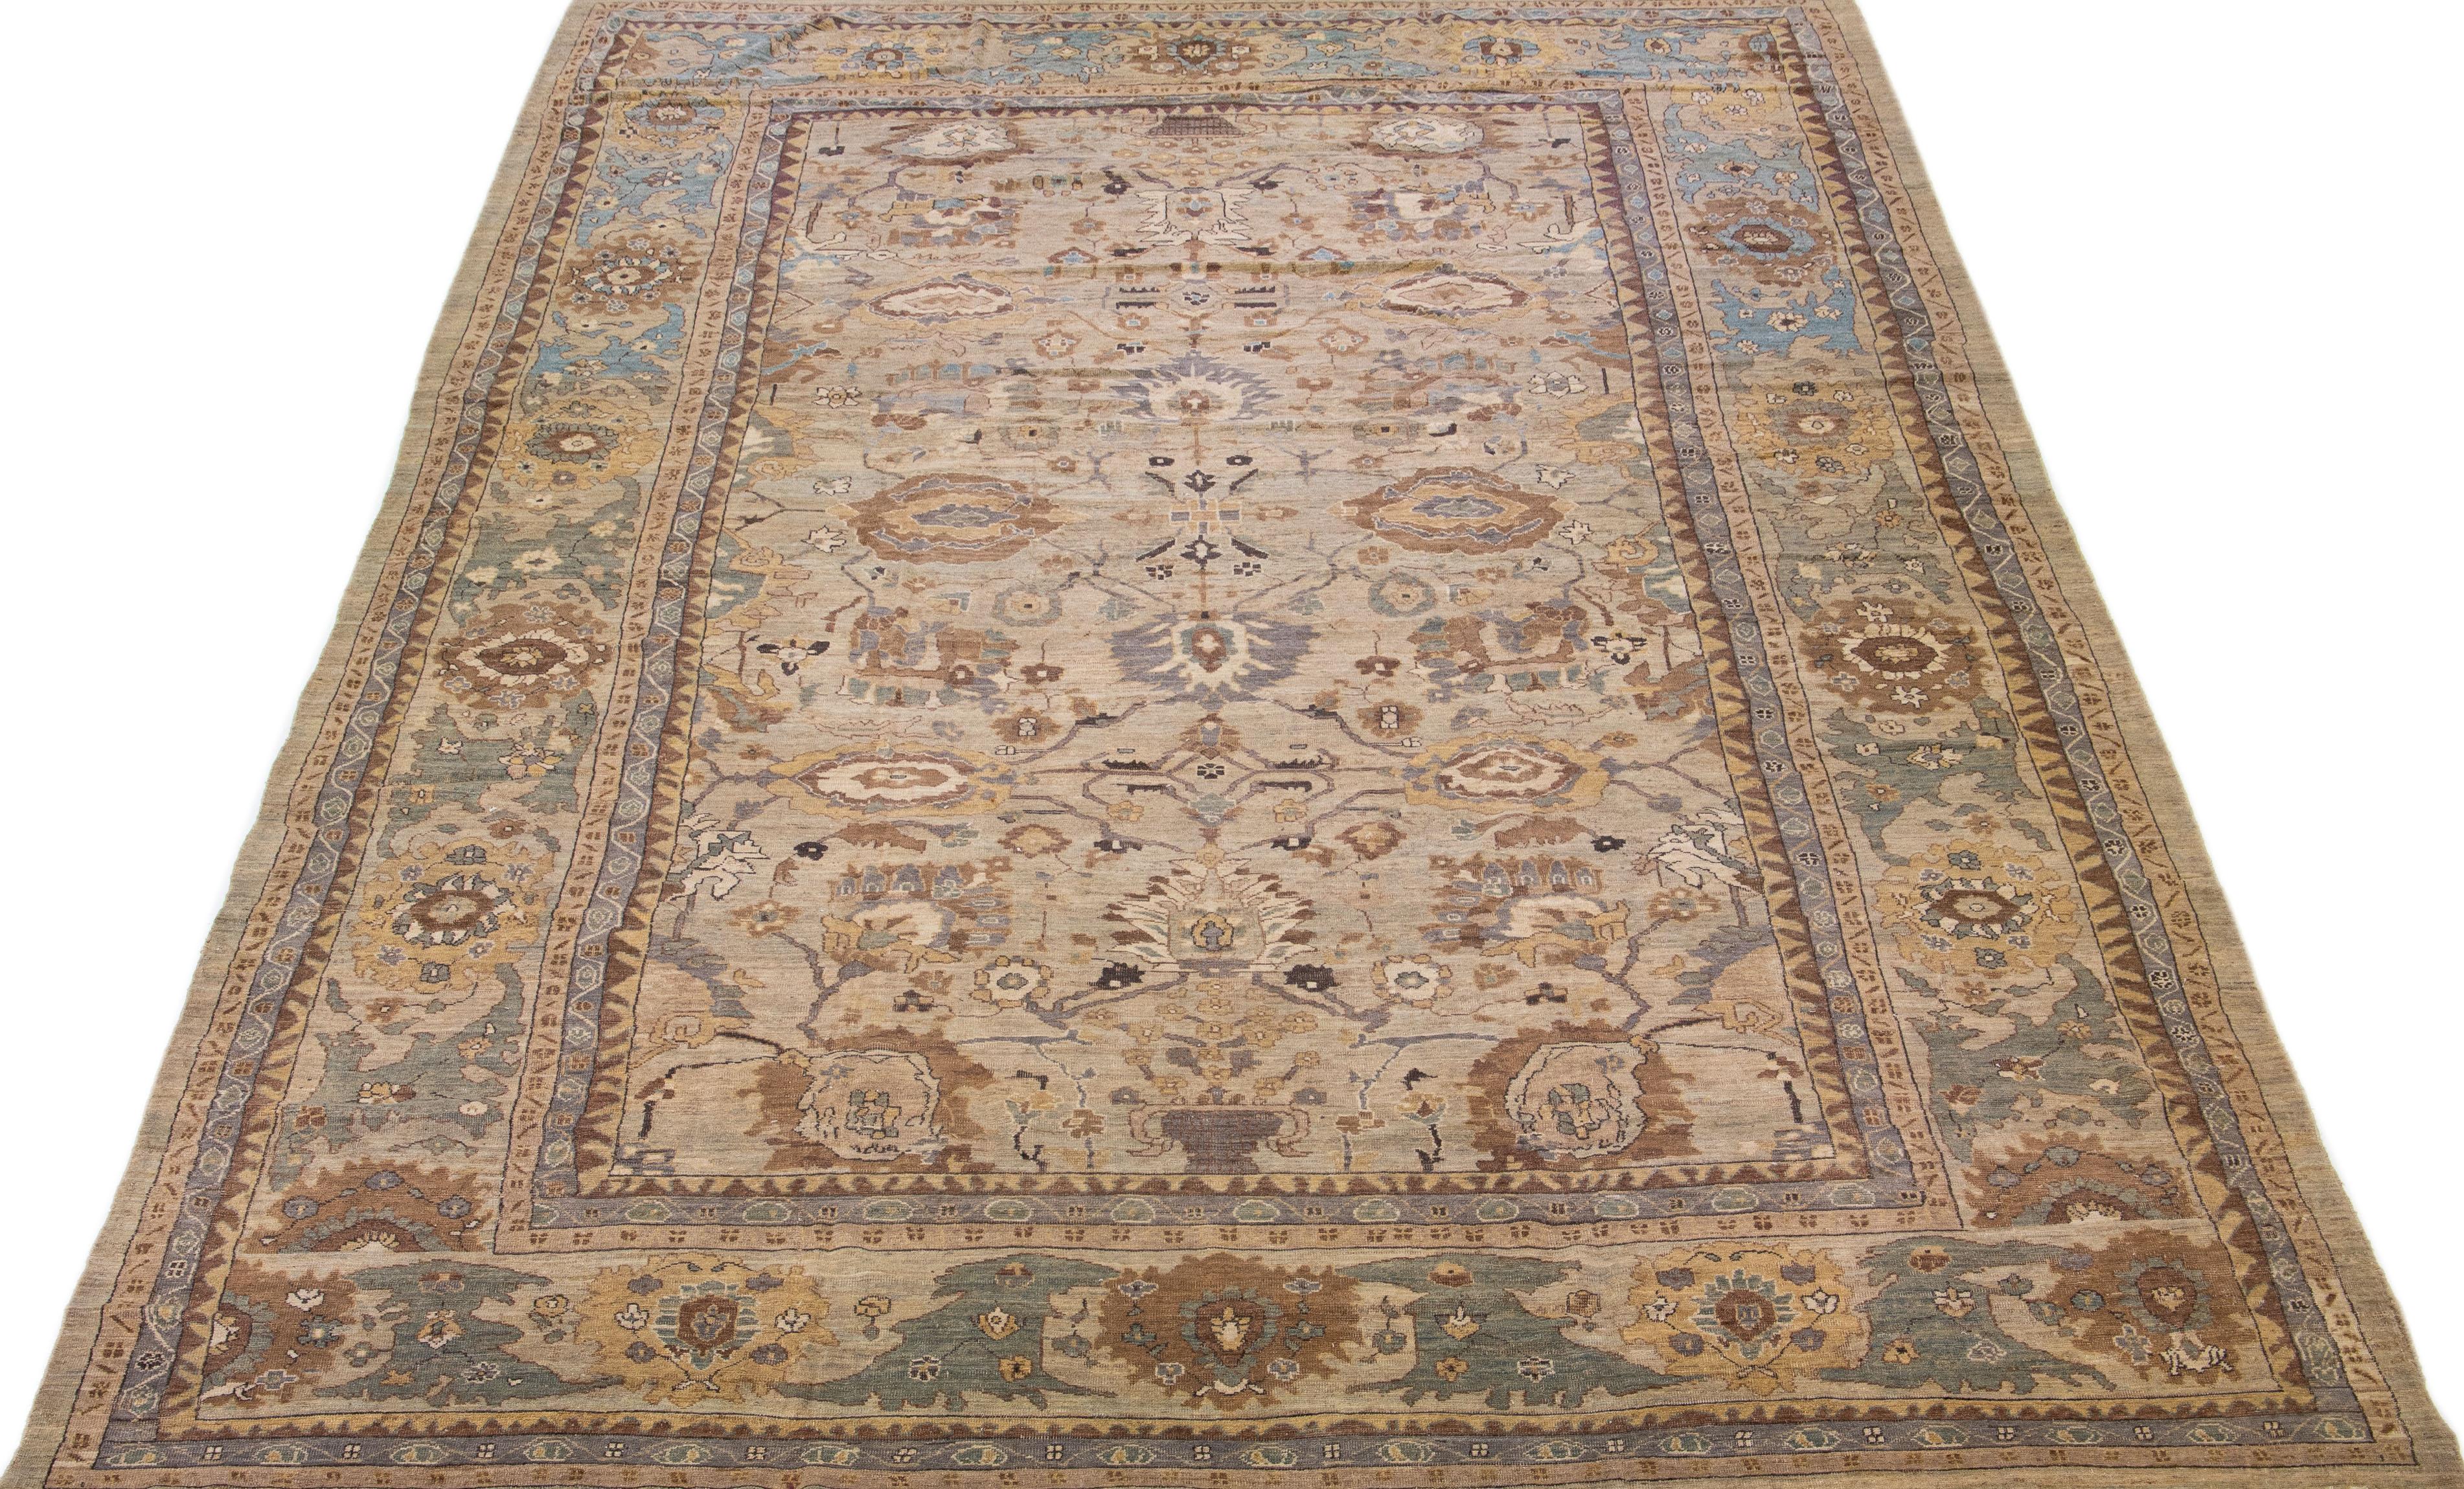 Beautiful modern Sultanabad hand-knotted wool rug with a brown color field. This rug has a designed frame with yellow, blue, and pink accents in a gorgeous all-over floral design.

This rug measures: 13'5